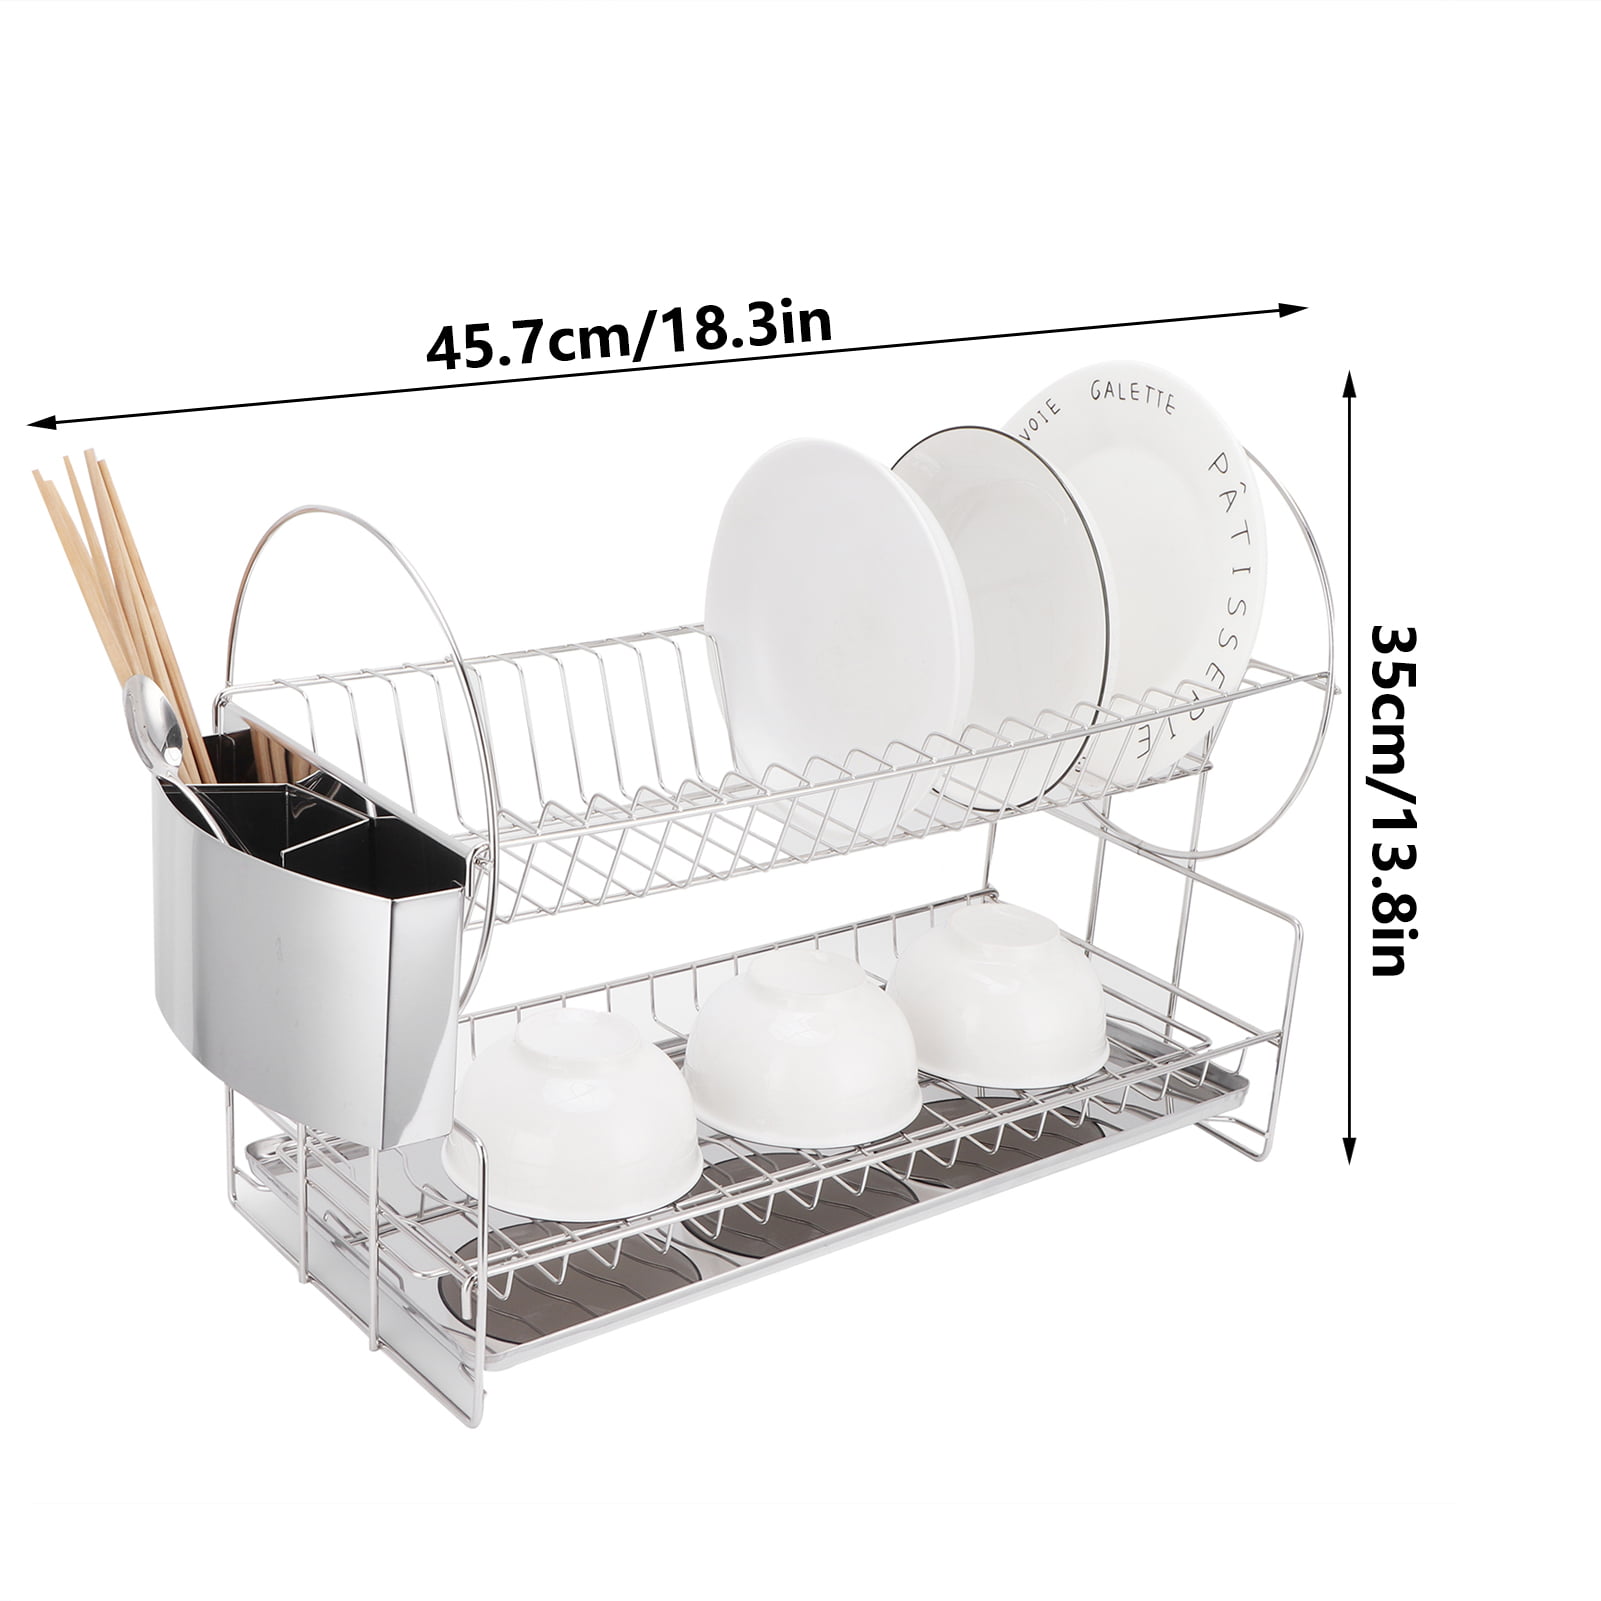 Tomorotec Never Rust Aluminum Dish Rack and Drain Board with Rose Gold